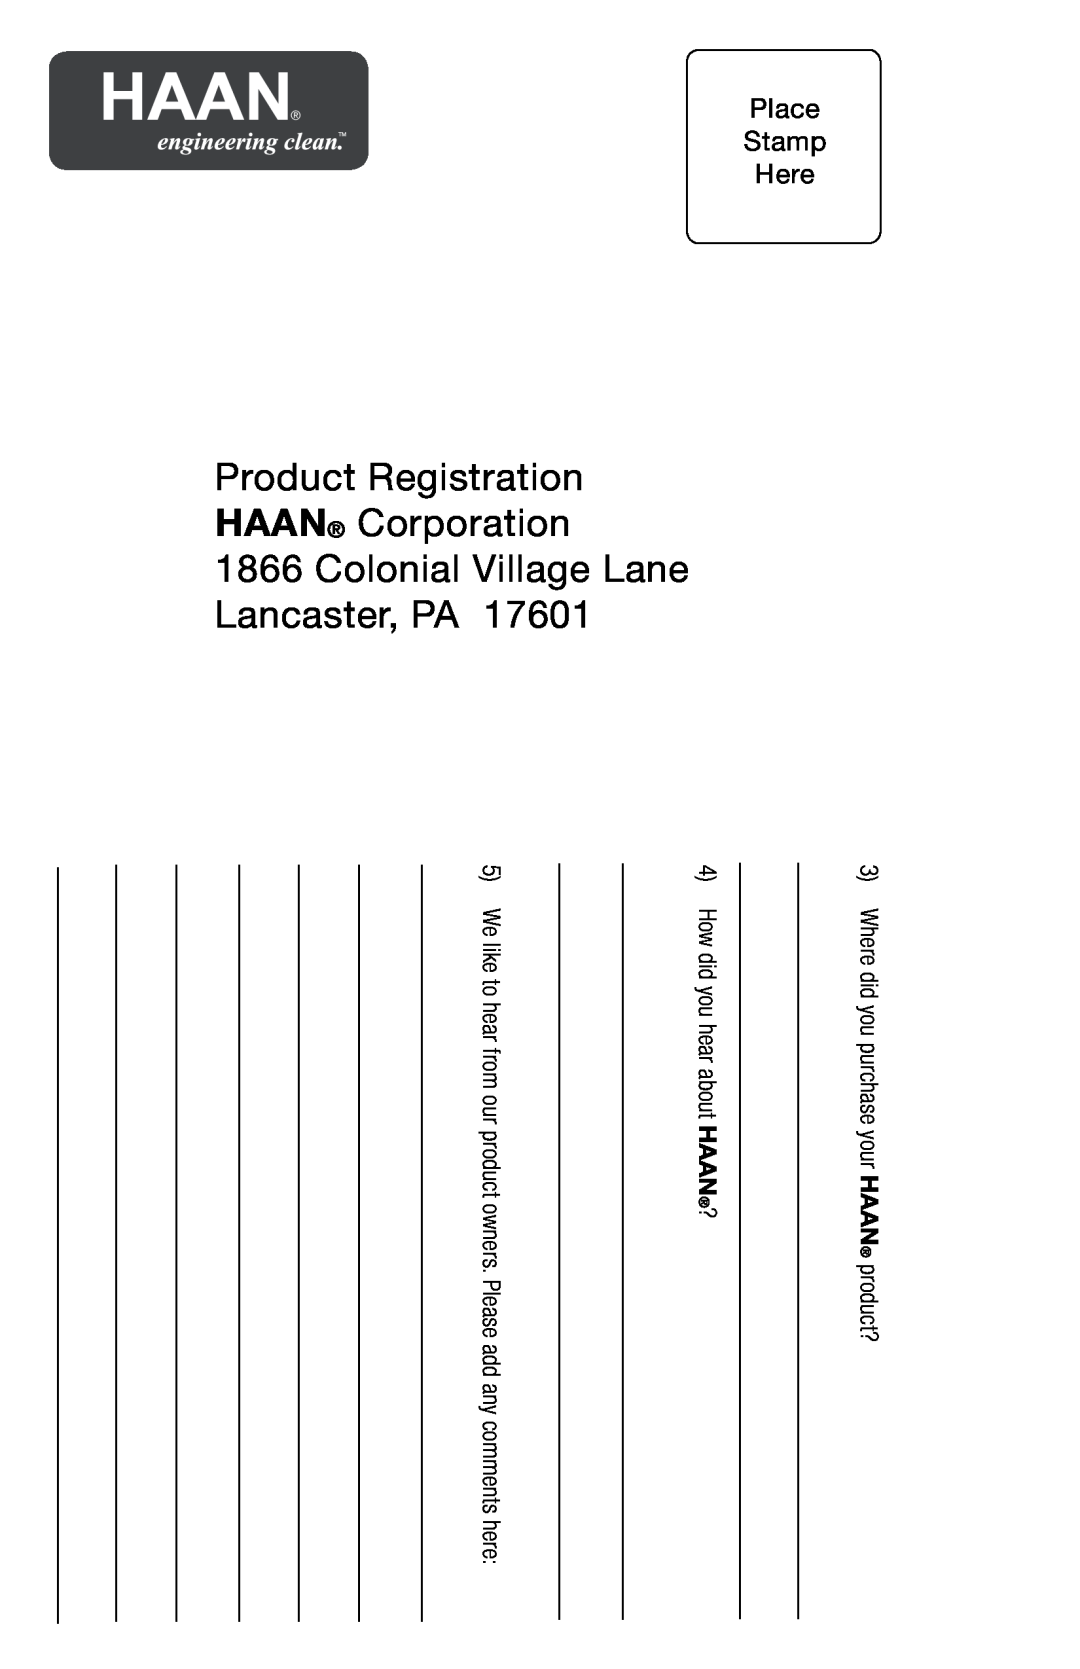 Haan FS-30P+ Product Registration HAAN Corporation 1866 Colonial Village Lane, Lancaster, PA, Place, Stamp, Here, Haan 